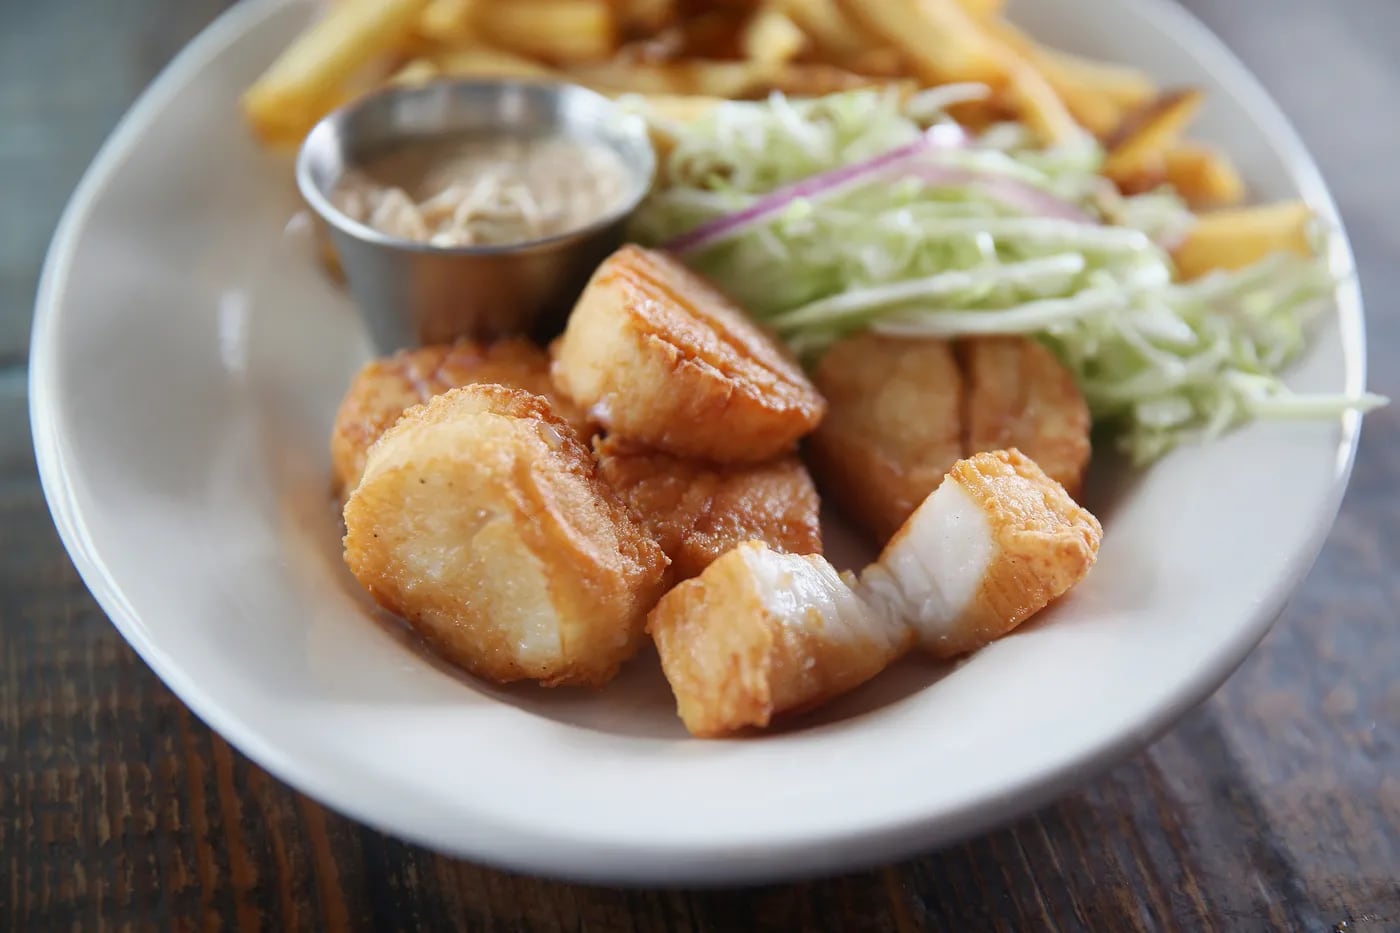 The simply fried scallops, plucked from the Lobster House’s own fishing fleet, are as delicious as ever.